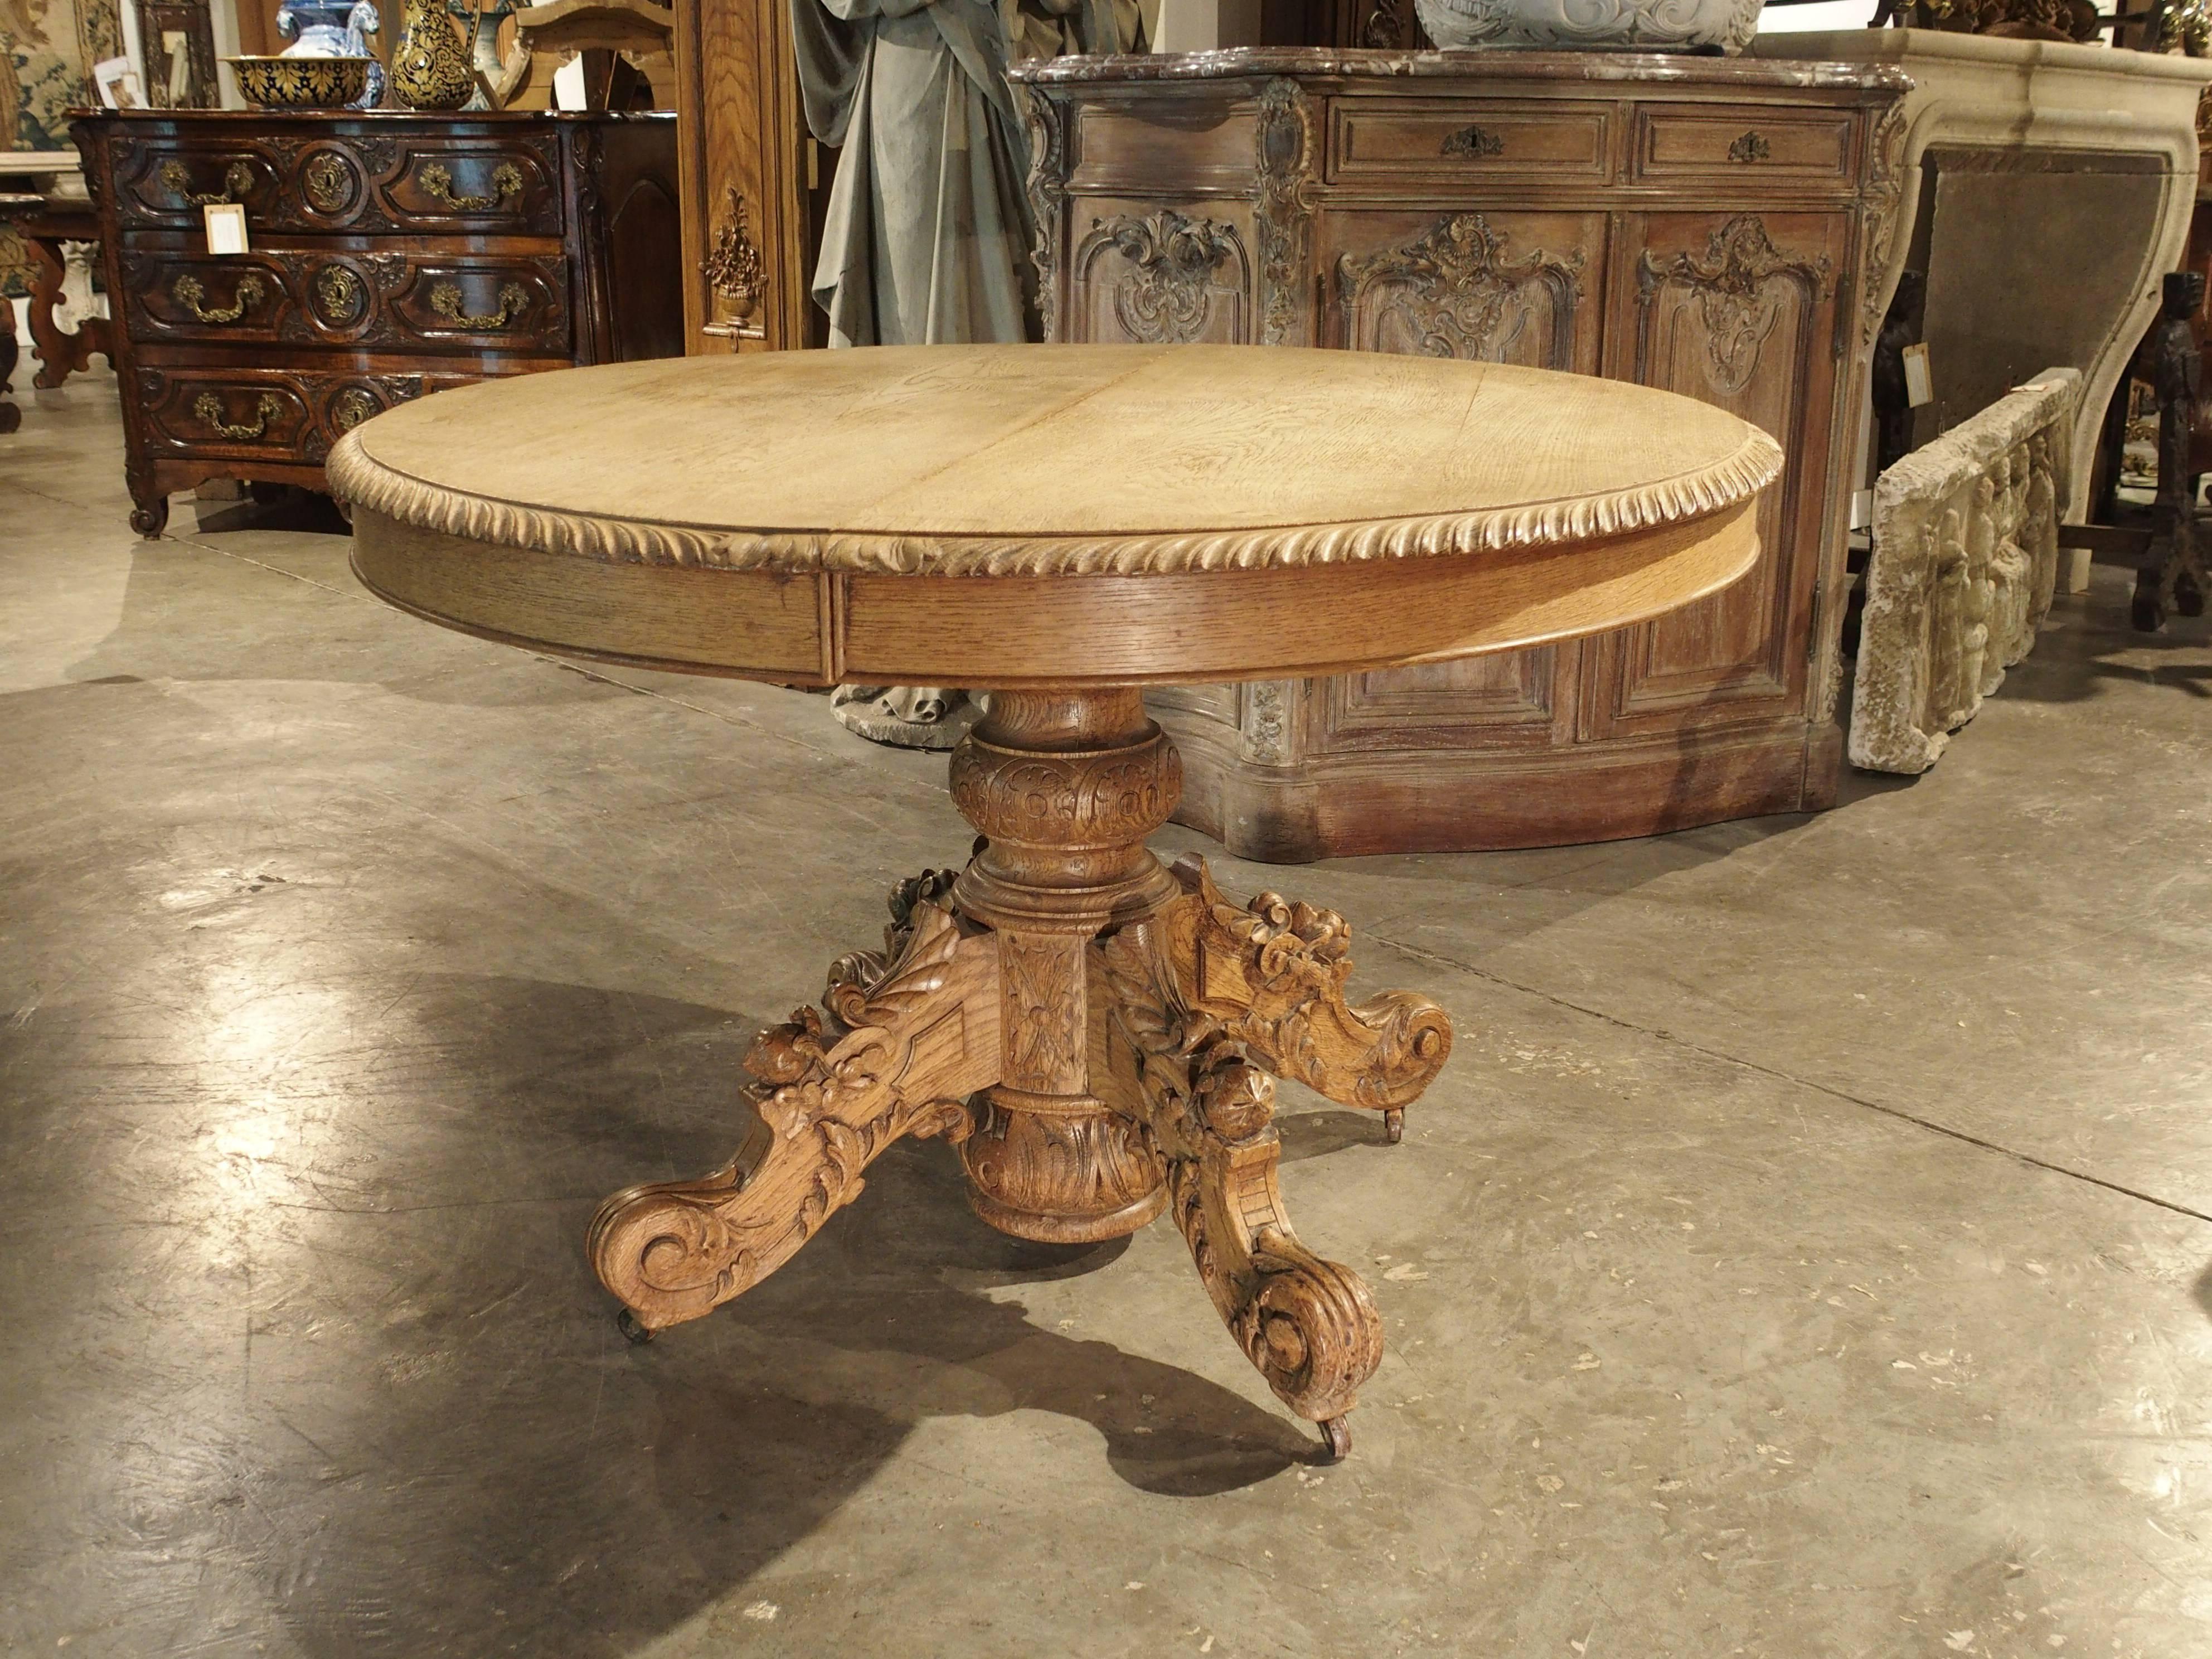 Renaissance Carved Oval Table Made of French Oak, Mid-1900s